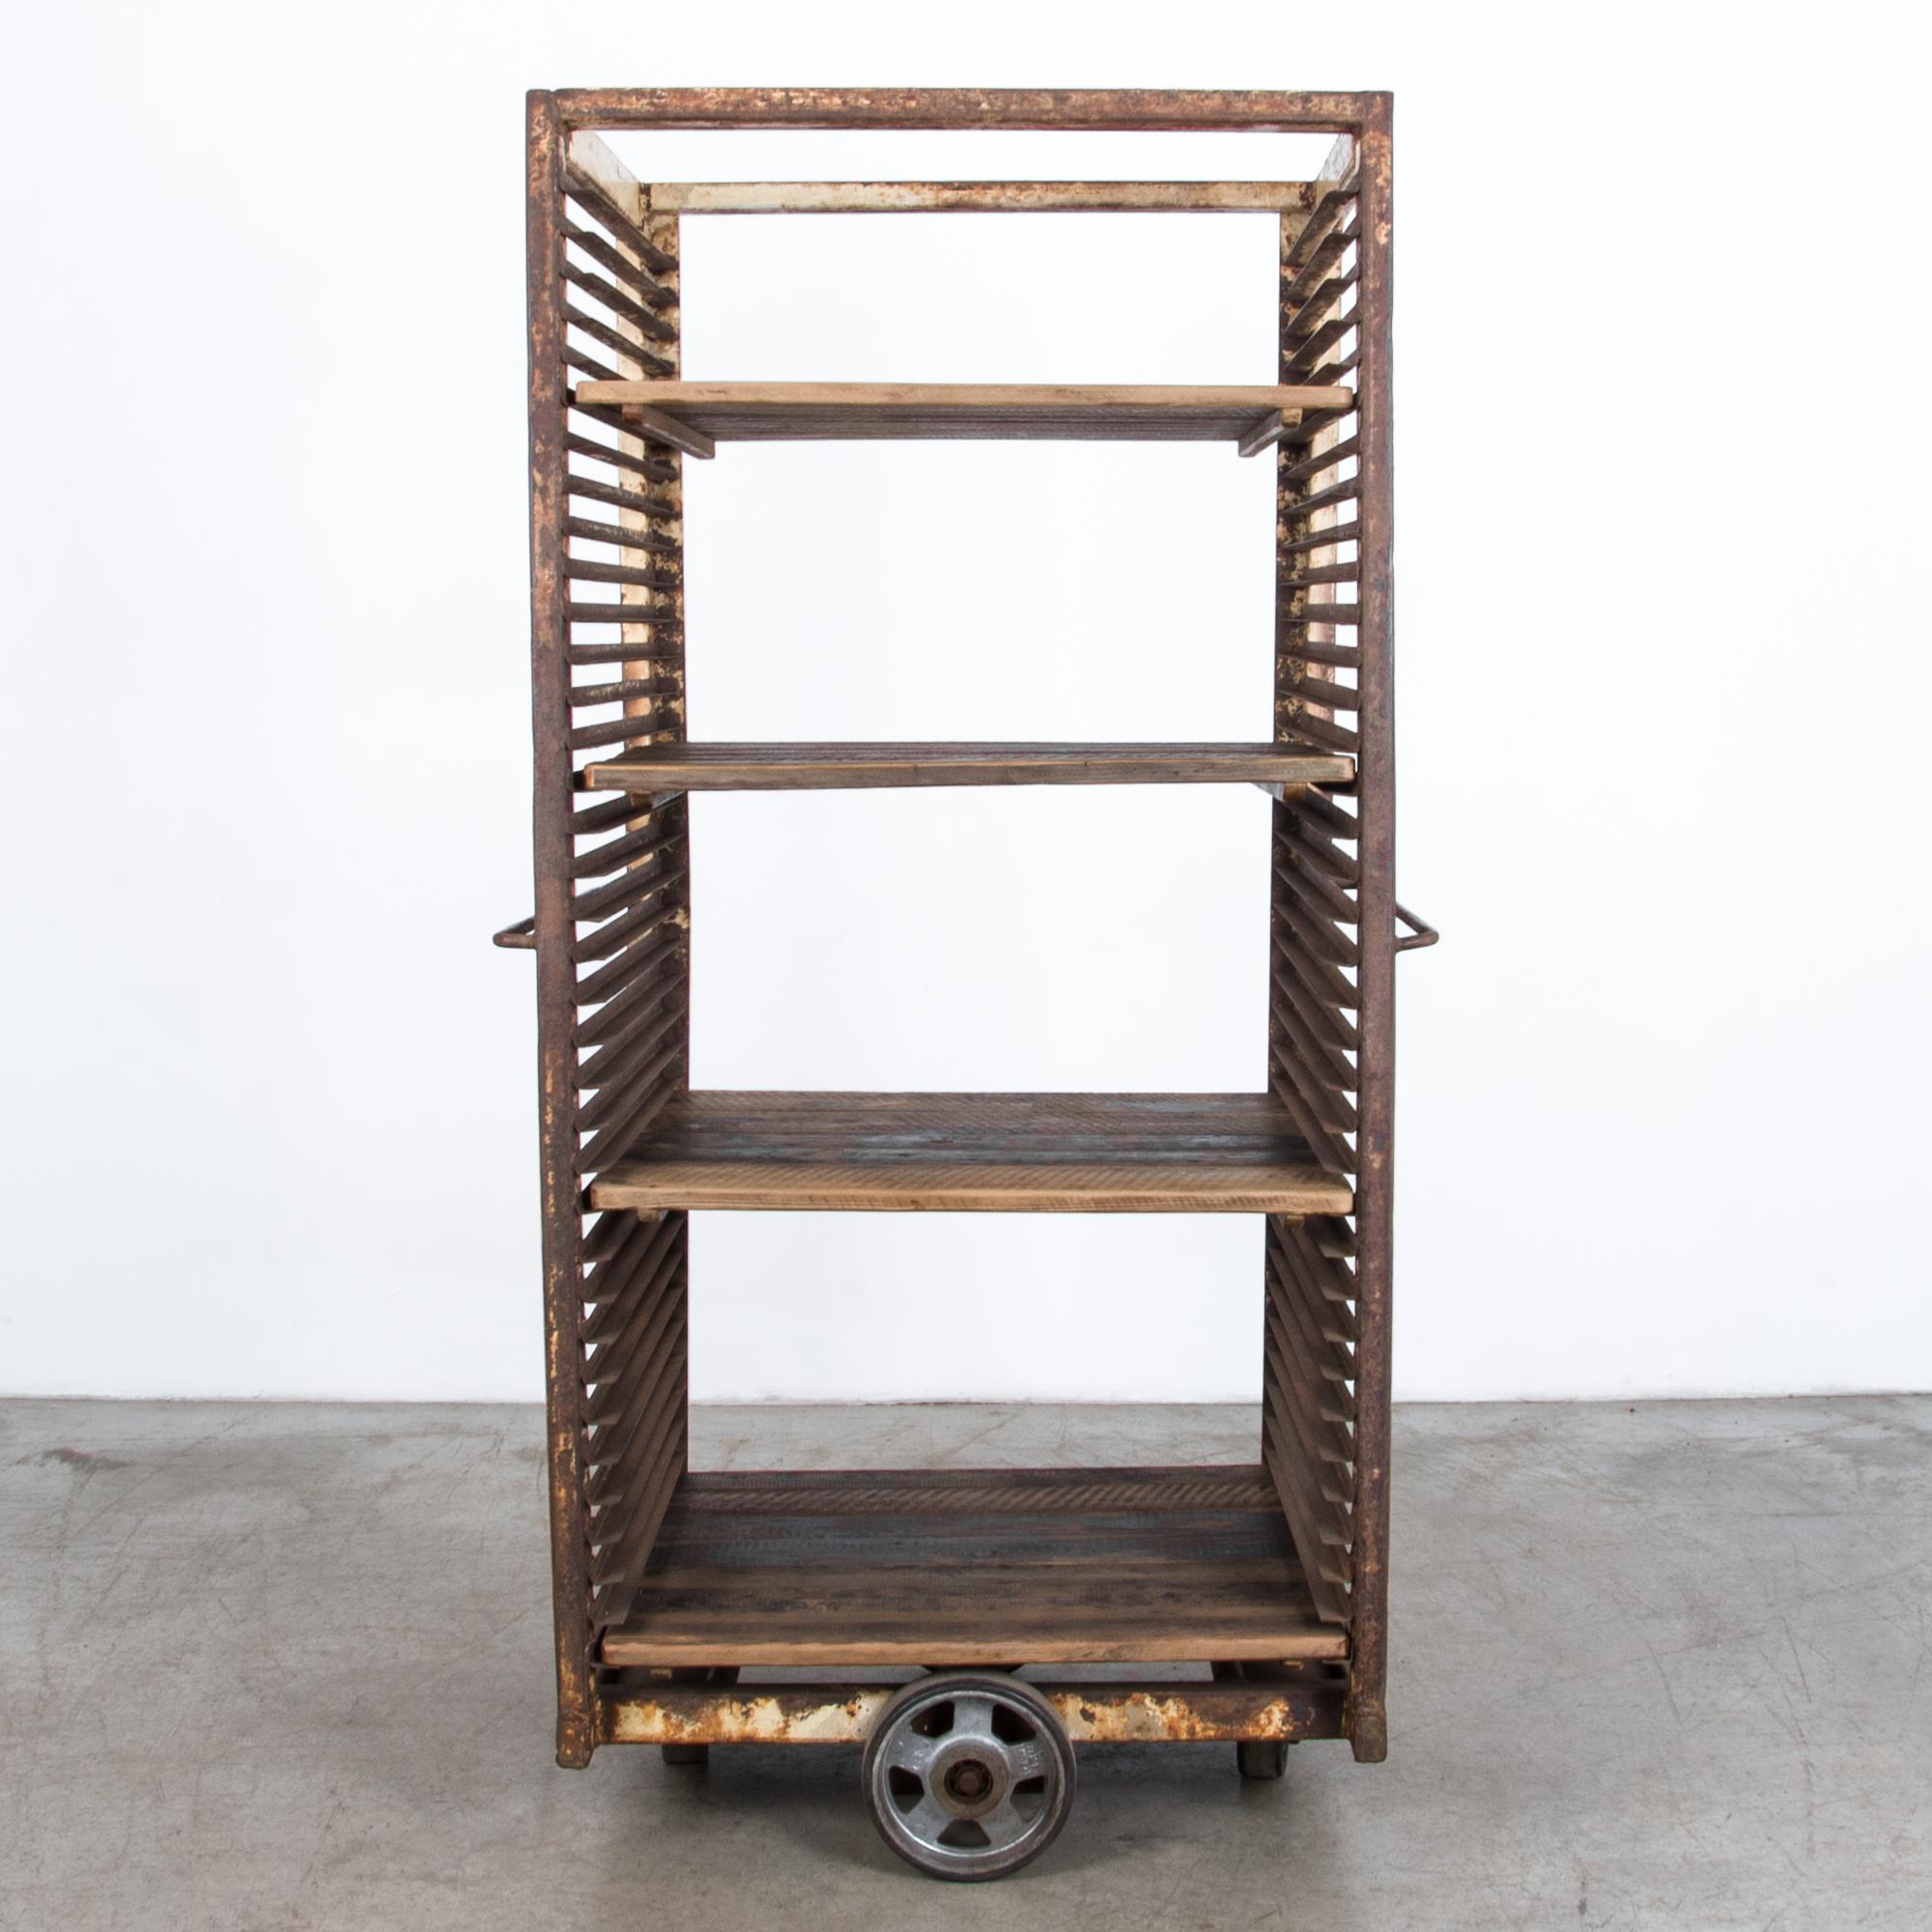 From France circa 1950, a tall wheeled iron cart with adjustable wooden shelves. With a thick textured patina worn by years of use, this shelving unit brings an industrial touch to a space needing texture.

A selection is available in a range of